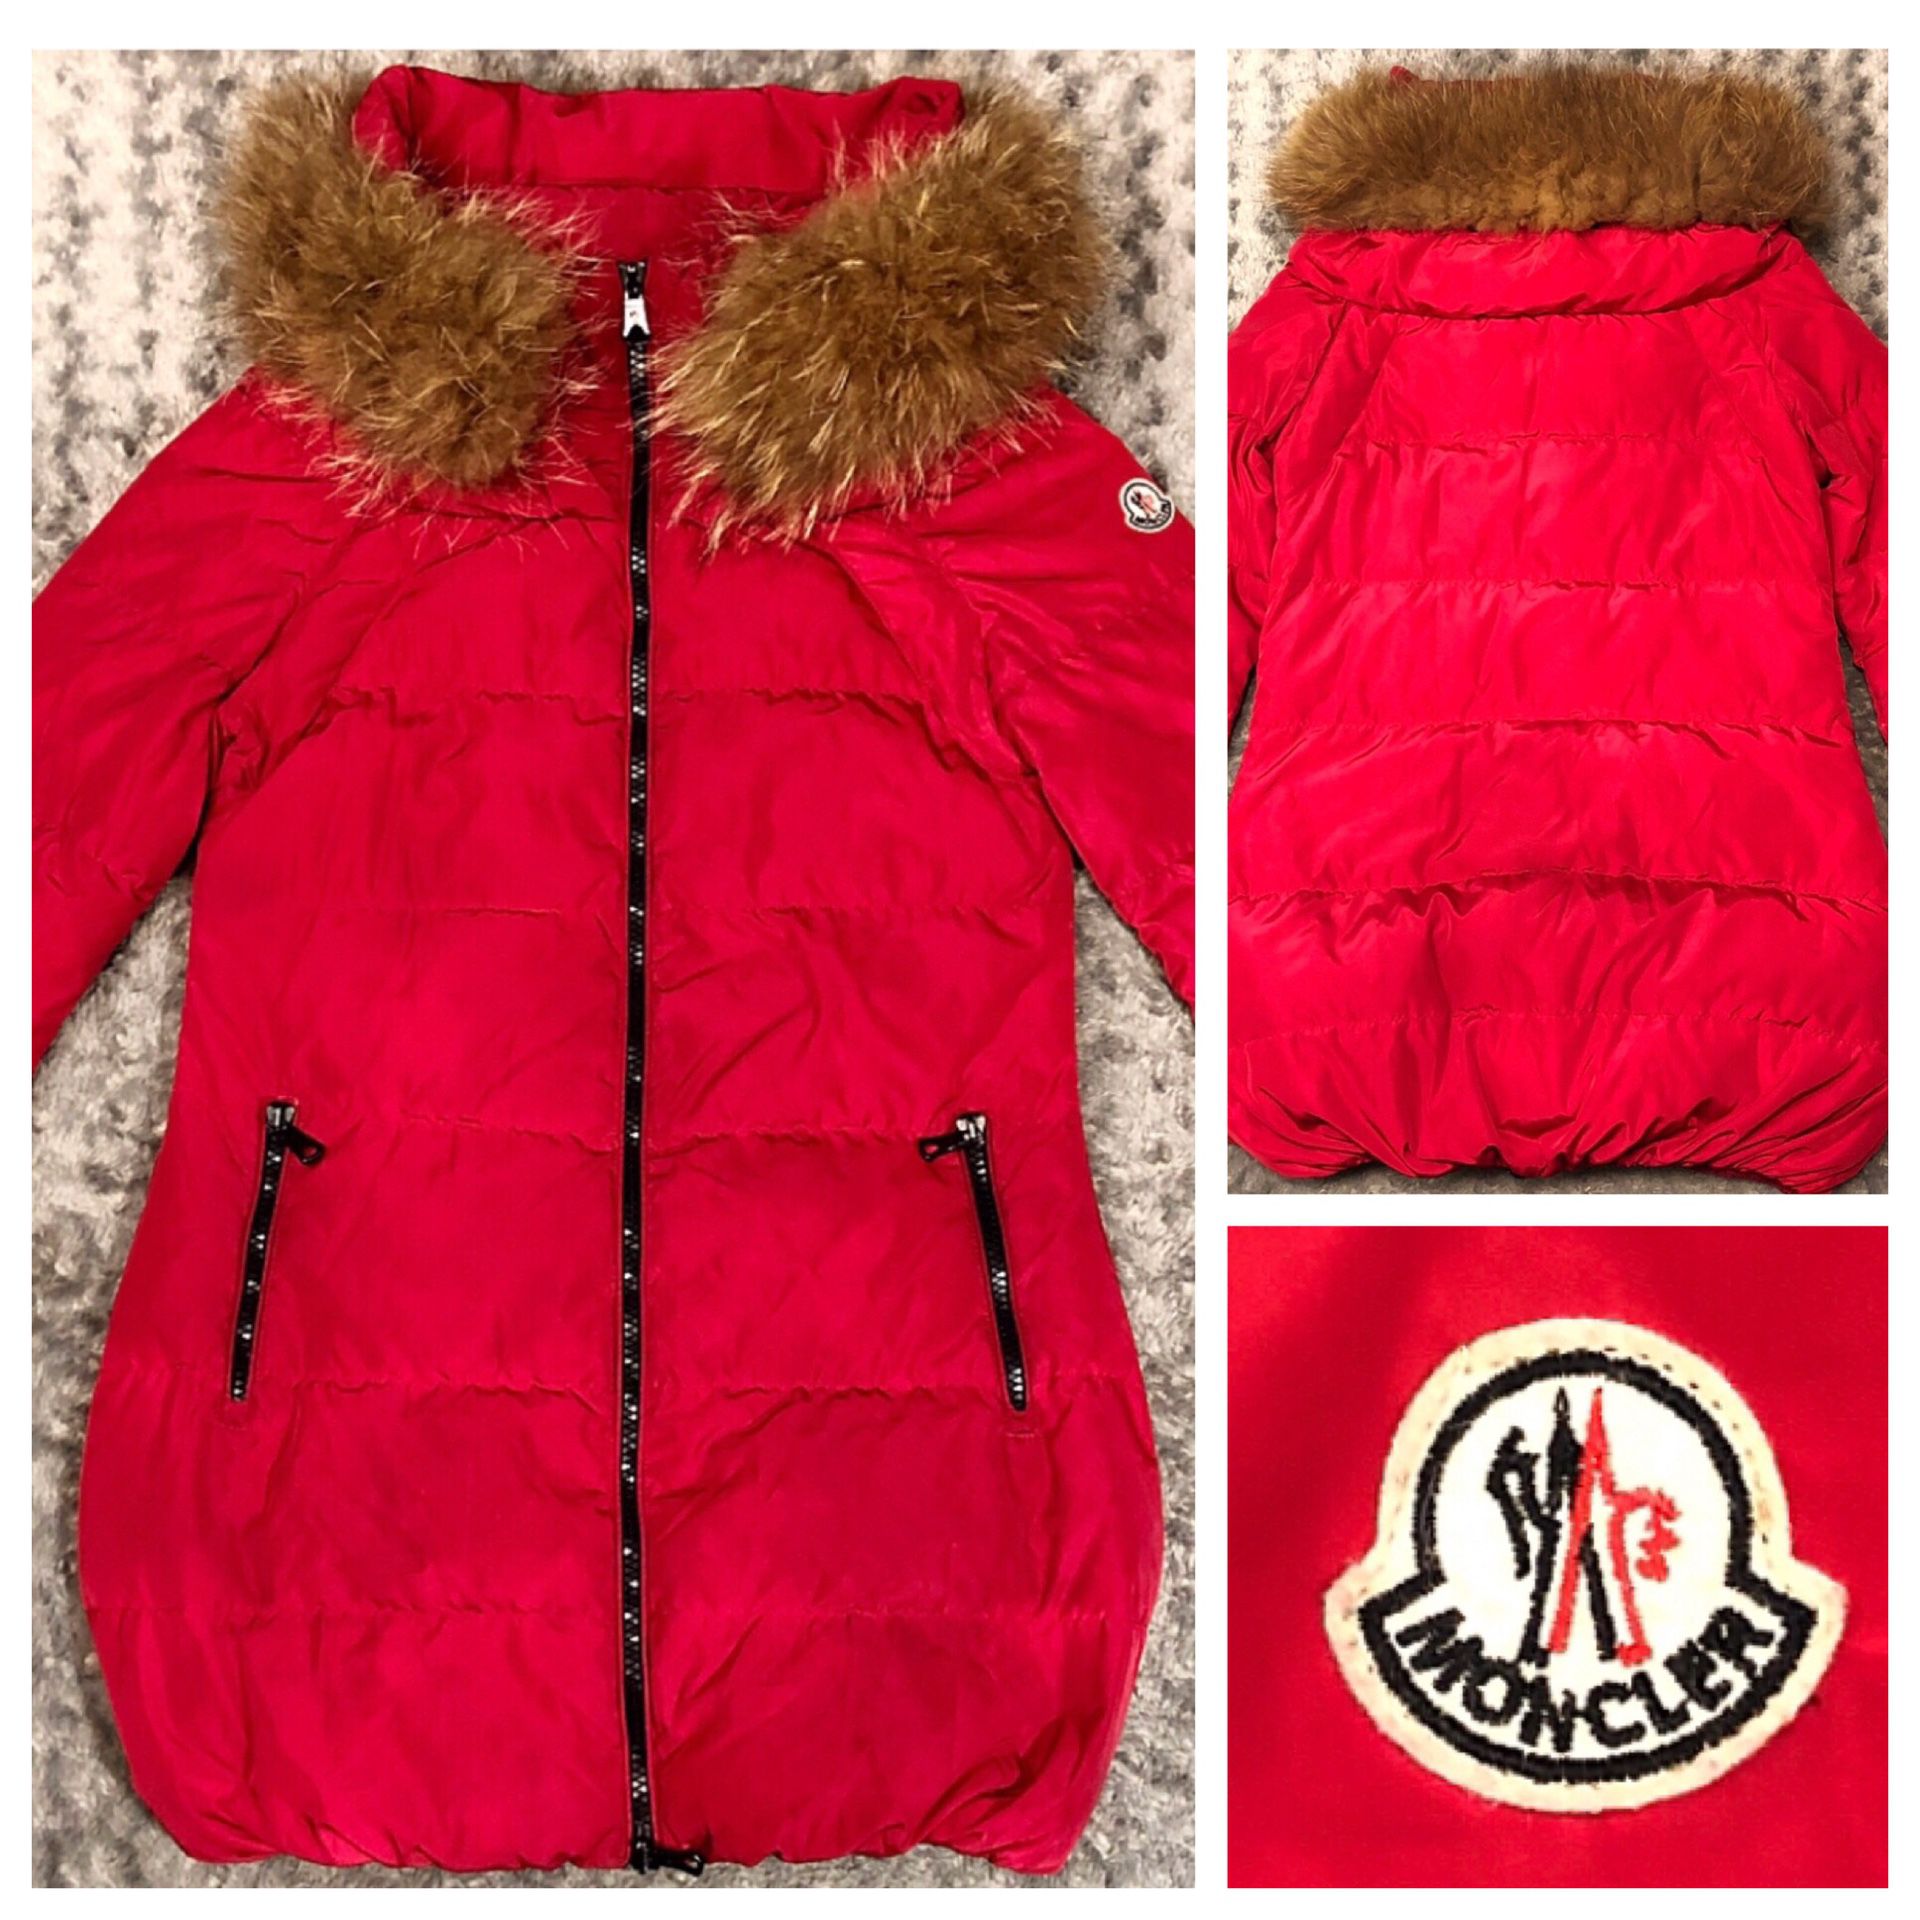 Women’s vintage Moncler coat retail $1,295 size S 100% authentic! Color red Nylon & Raccoon Fur trimmed Hooded Down Jacket. Perfect for cold climates